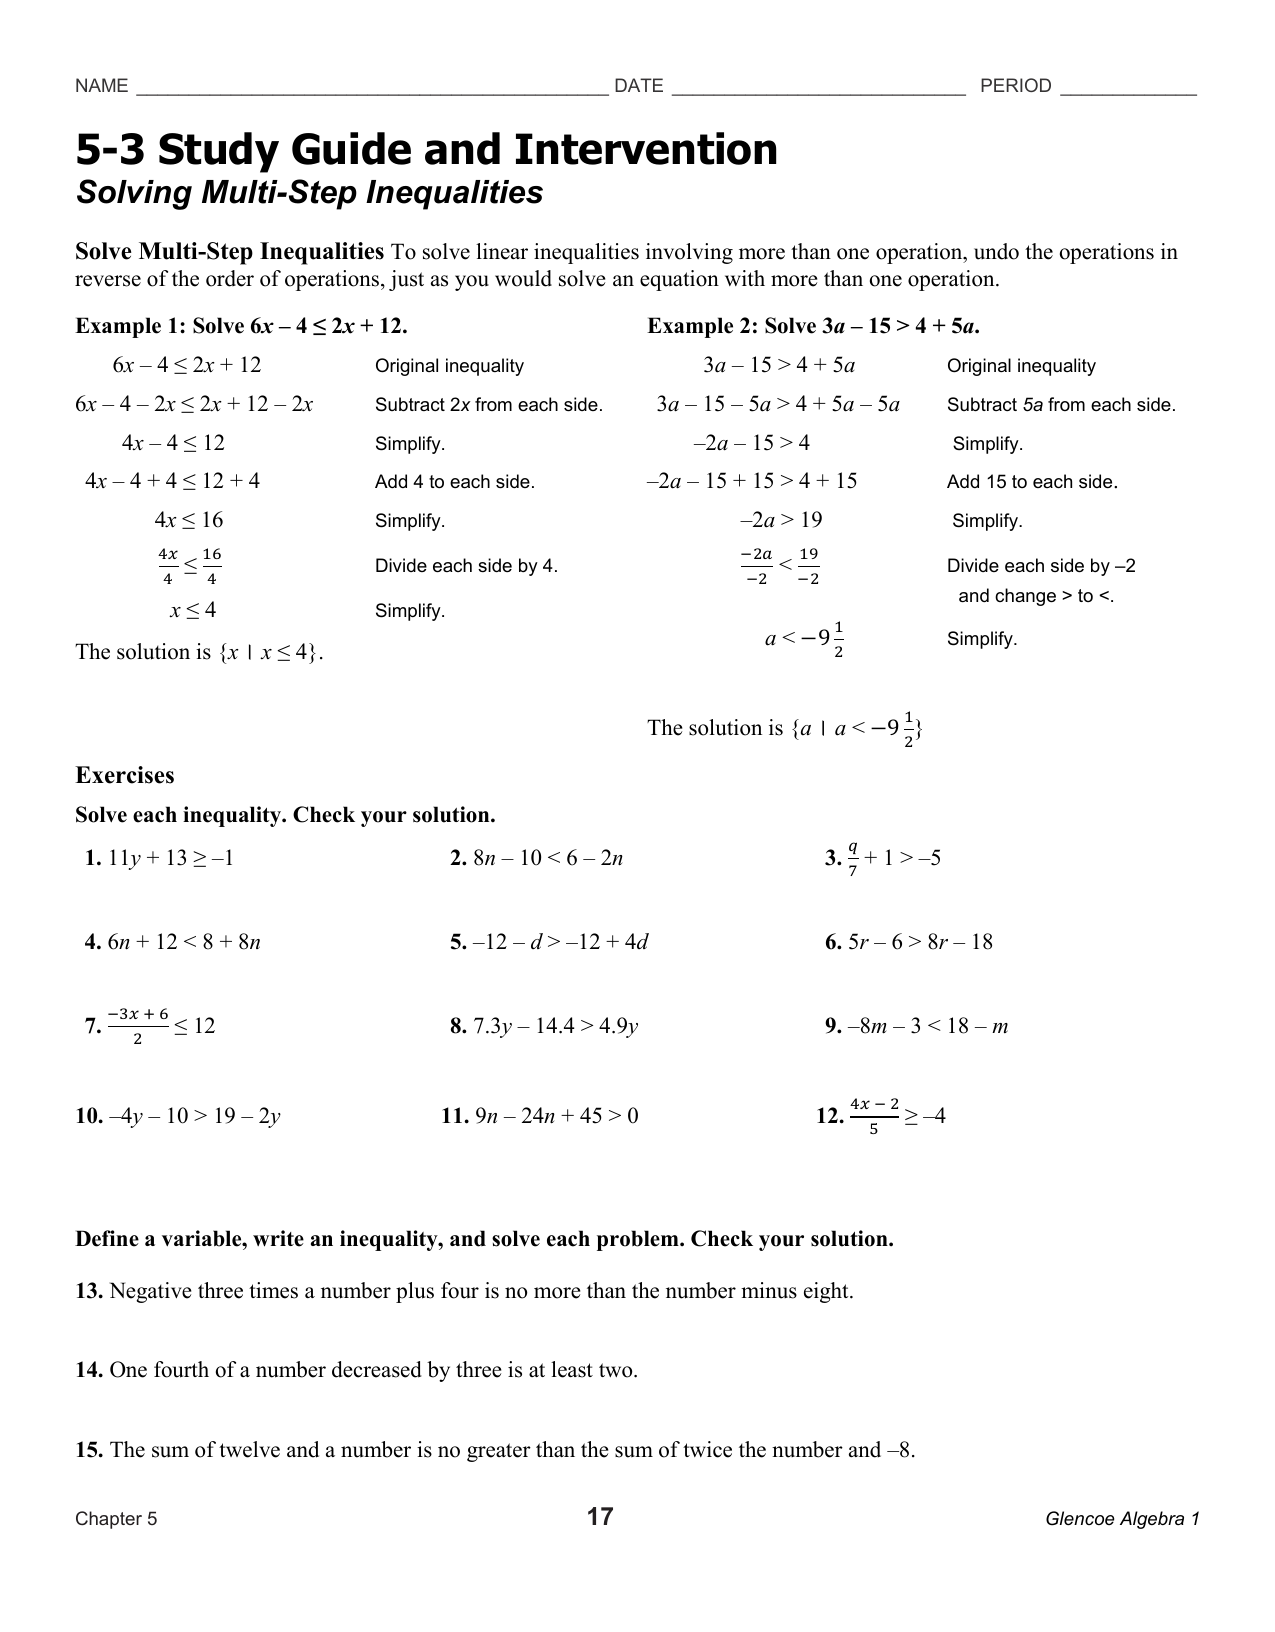 assignment 17.1 verifying solutions for linear inequalities answer key